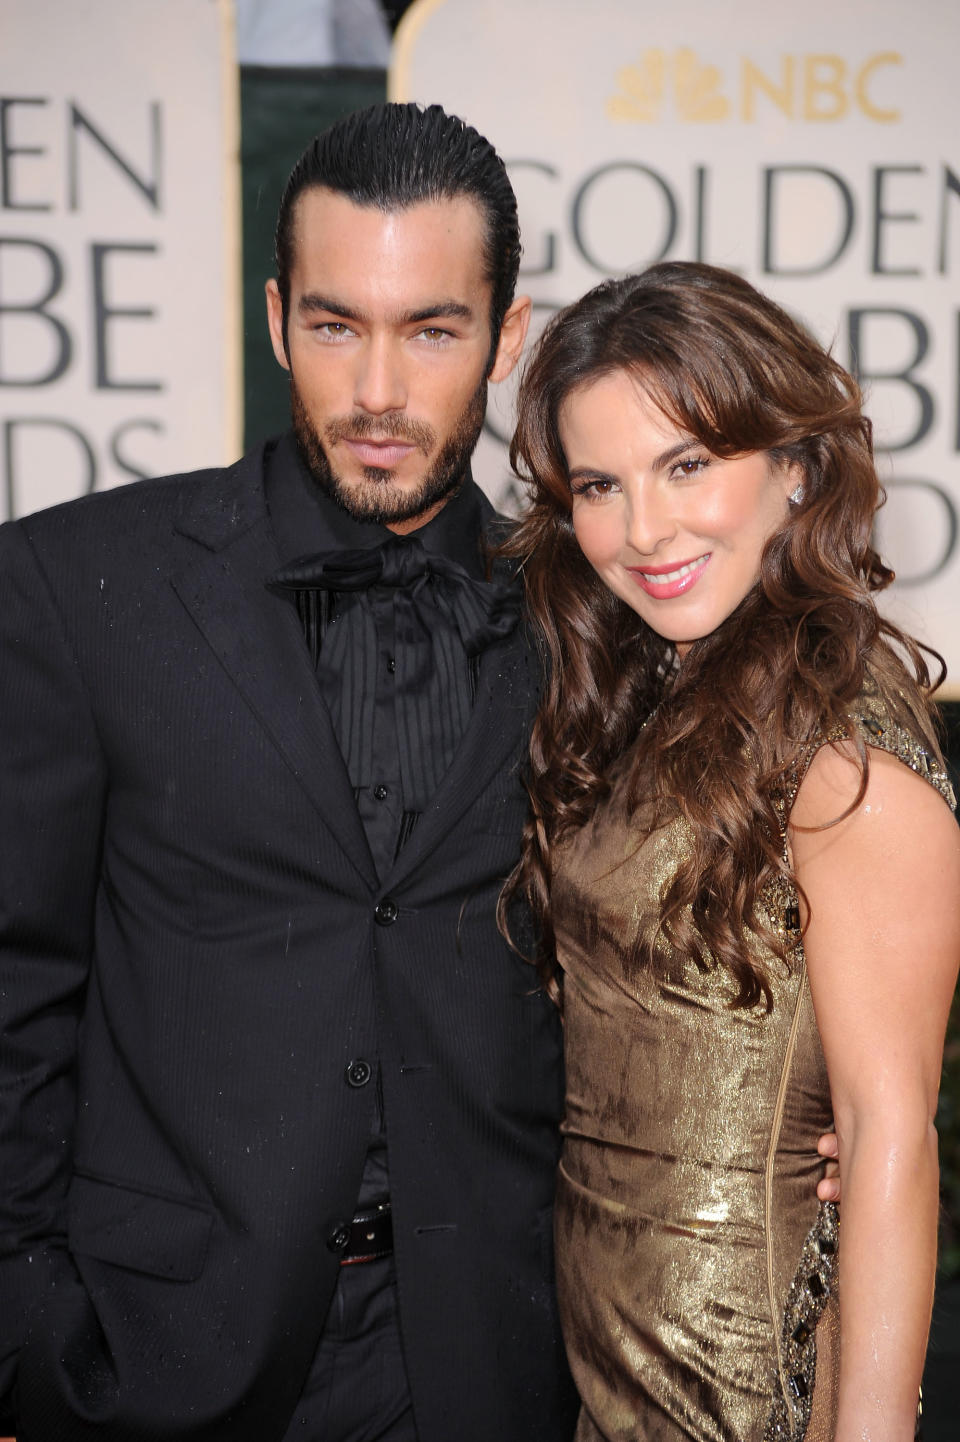 BEVERLY HILLS, CA - JANUARY 17:  Actor Aaron Diaz (L) and TV personality Kate del Castillo arrive at the 67th Annual Golden Globe Awards held at The Beverly Hilton Hotel on January 17, 2010 in Beverly Hills, California.  (Photo by Frazer Harrison/Getty Images)